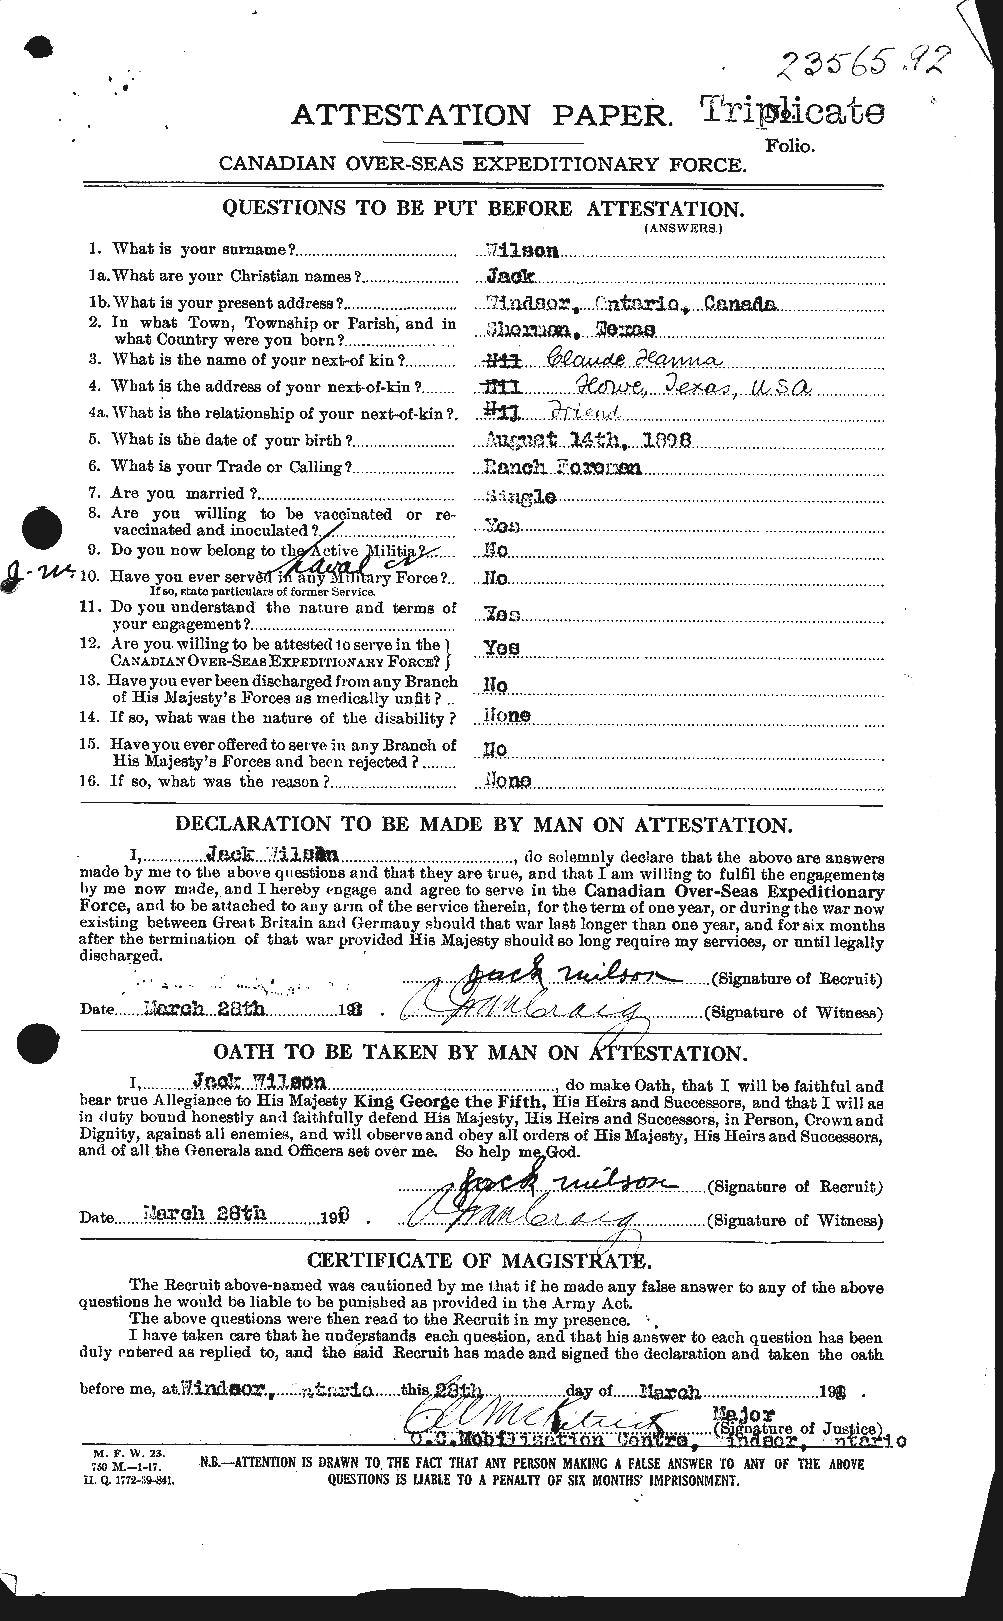 Personnel Records of the First World War - CEF 679641a